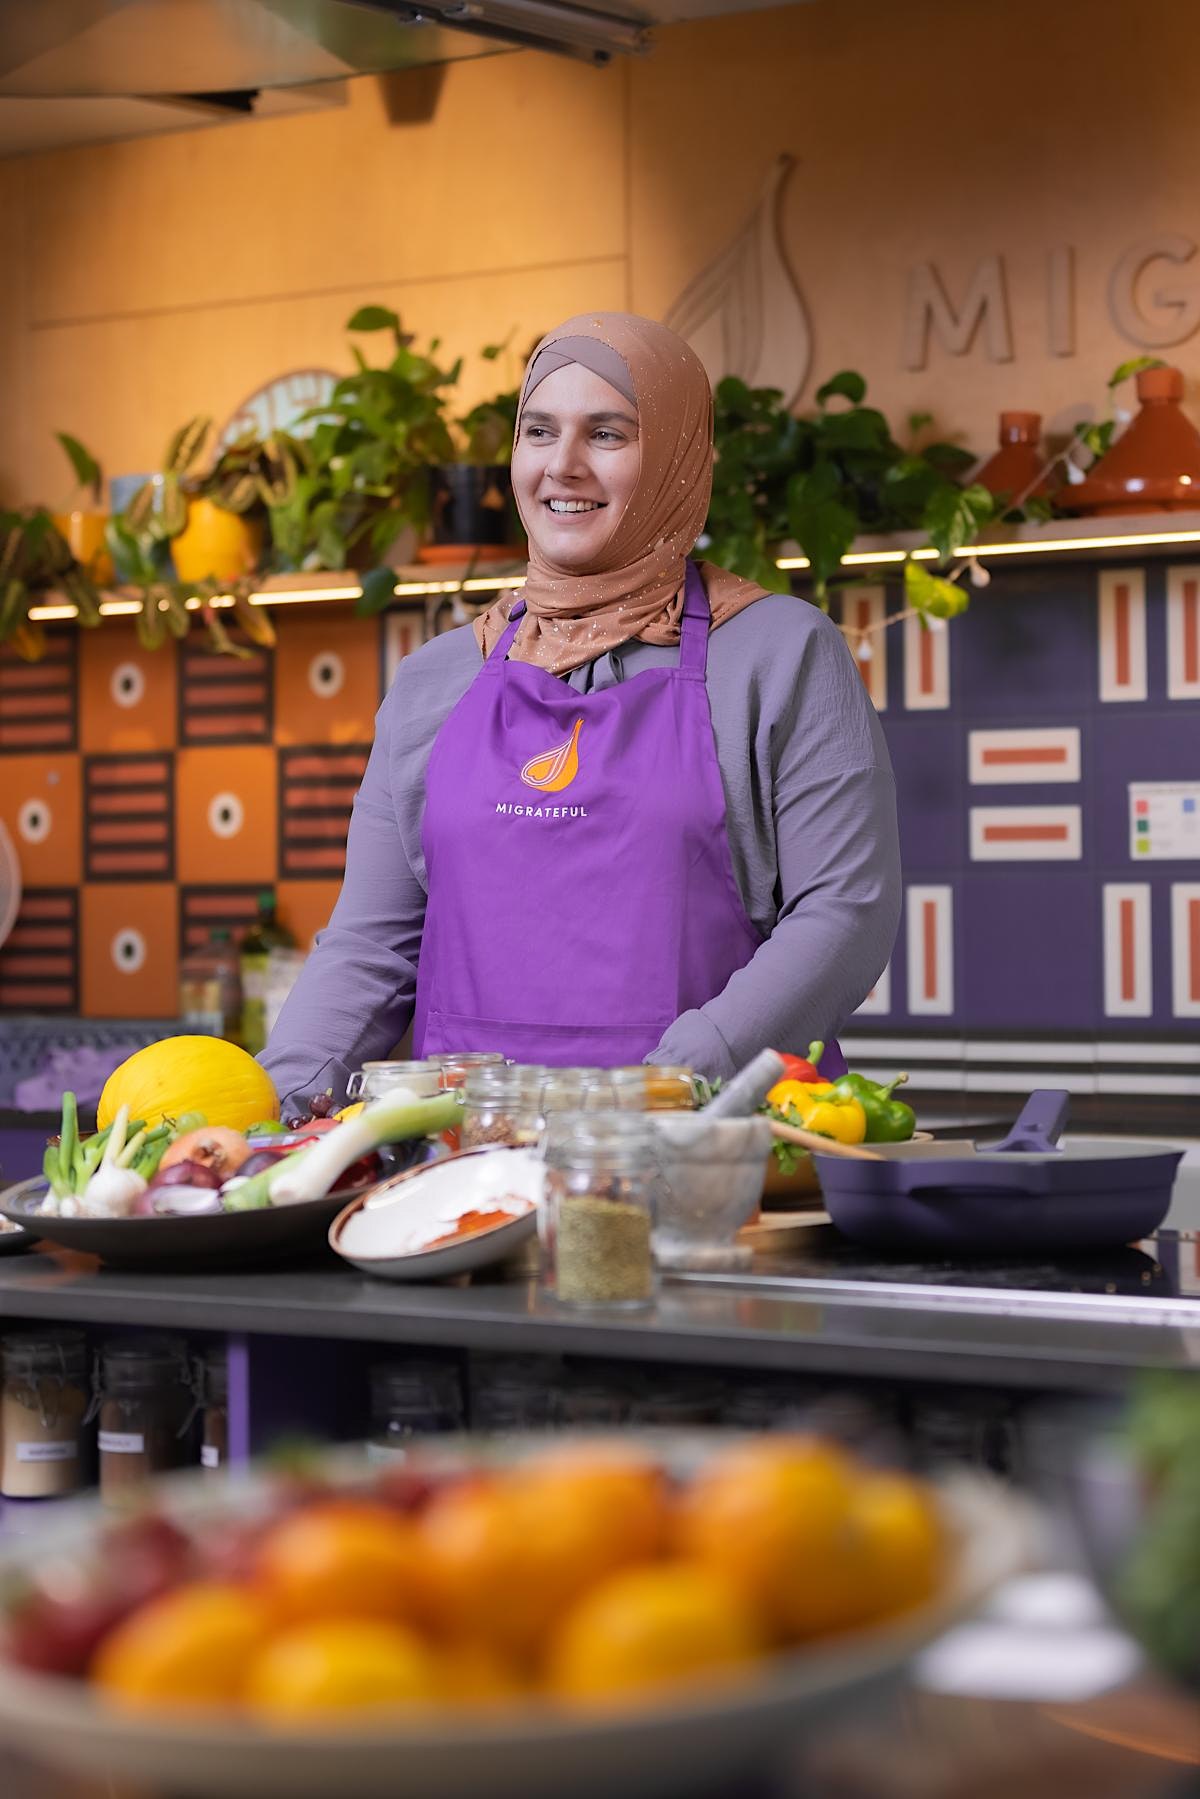 A woman in a purple apron standing in front of a kitchen, teaching a London Cookery Class as part of Migrateful.